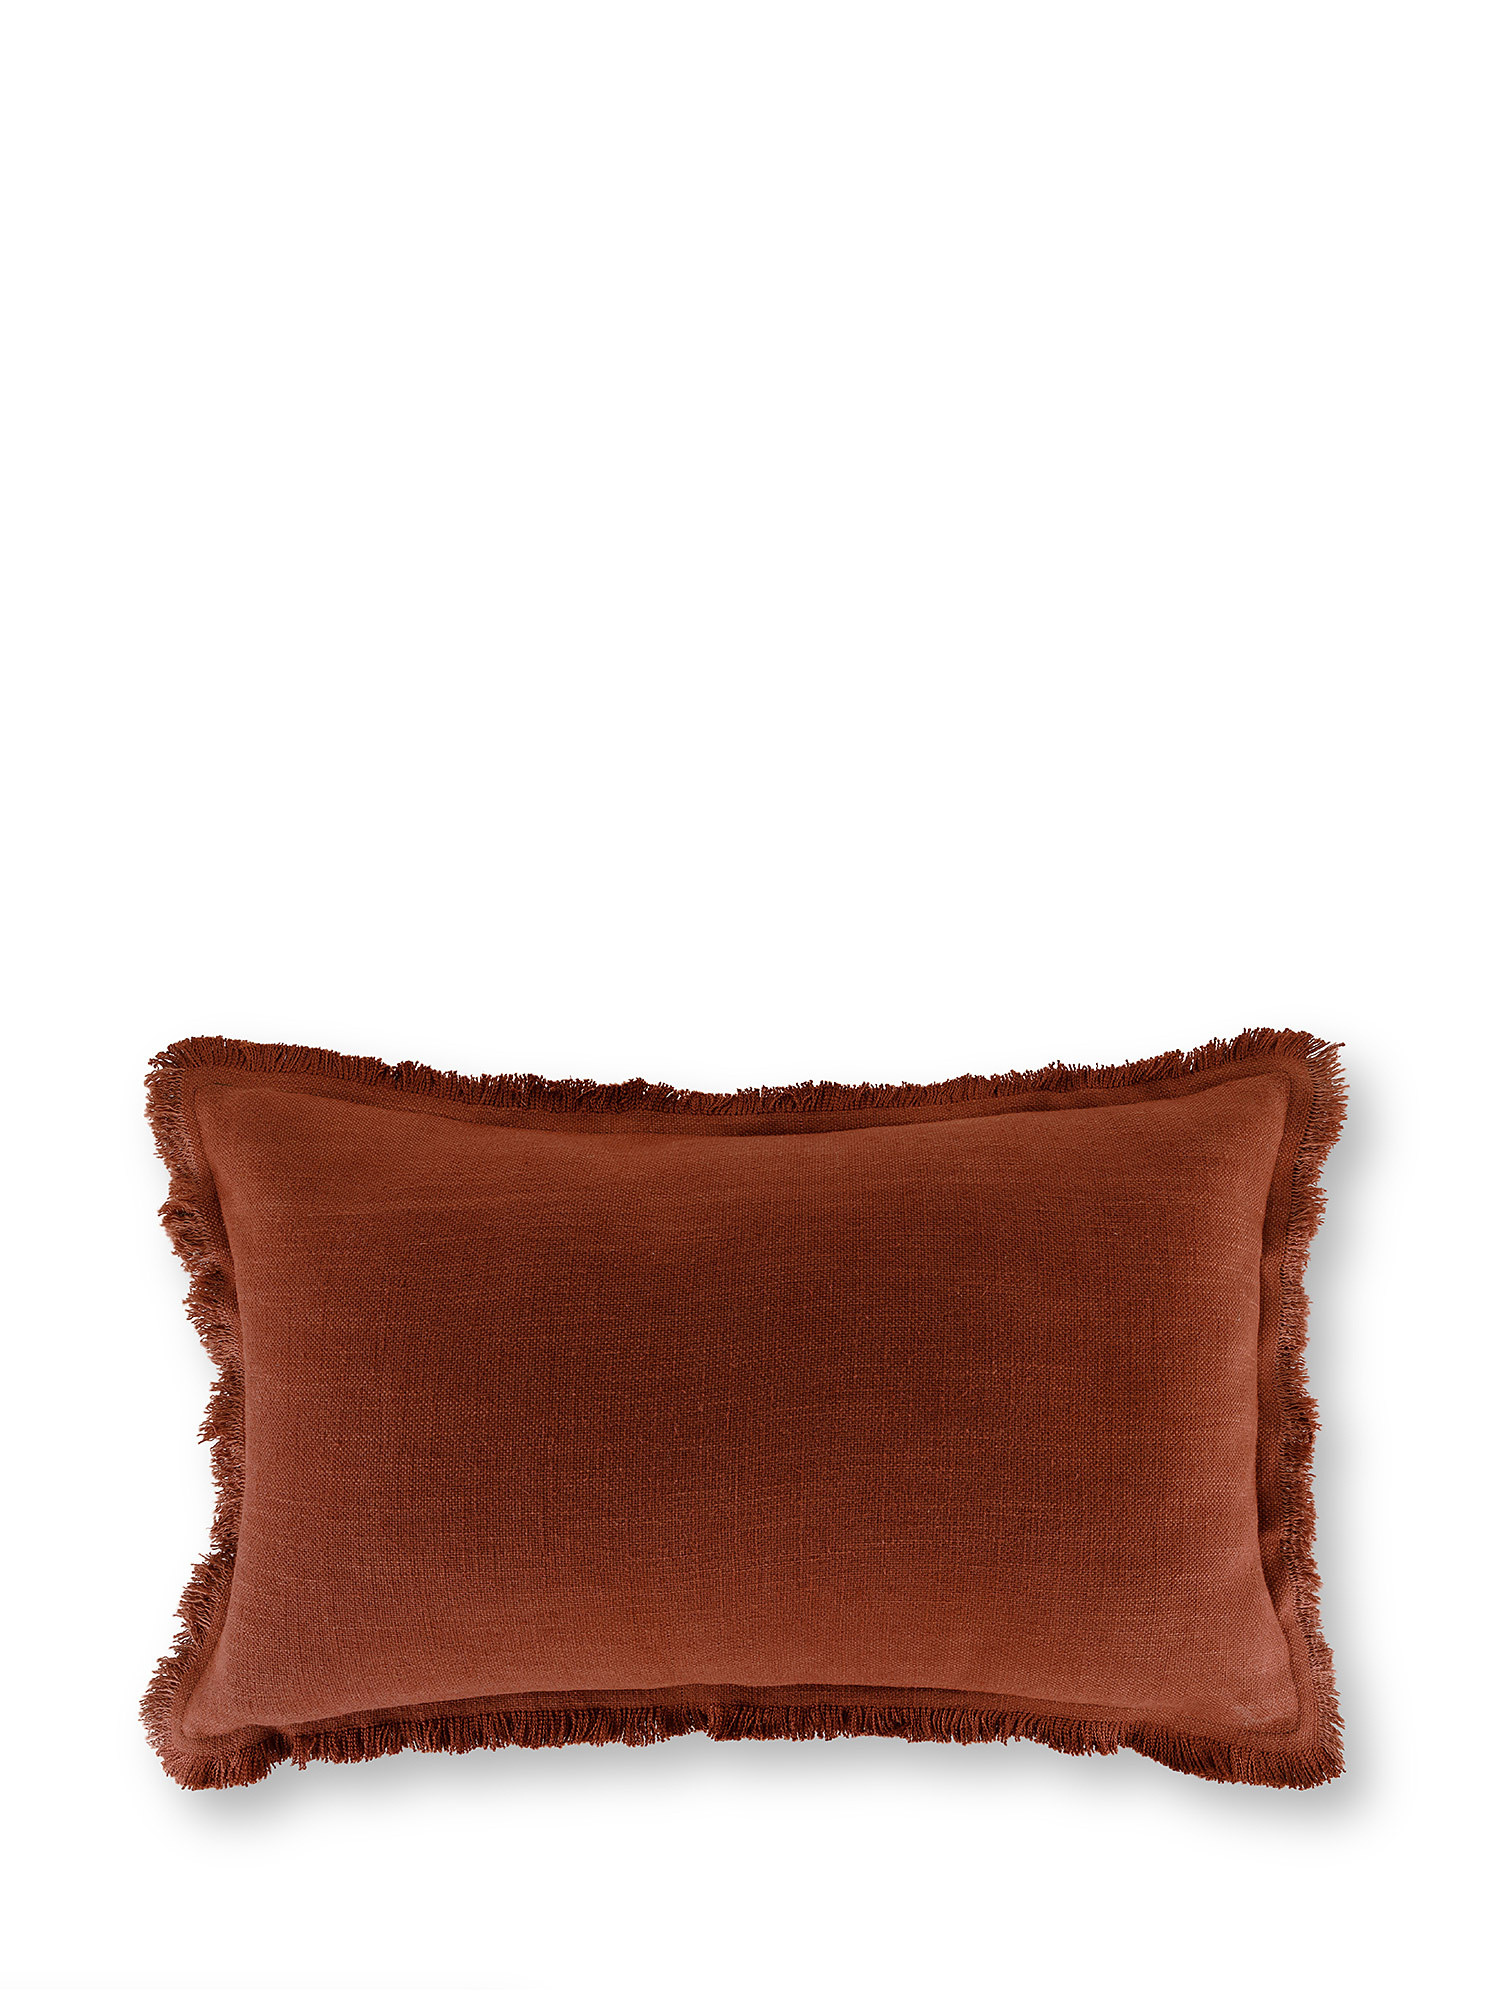 Washed cushion with fringes 35x55cm, Brown, large image number 0